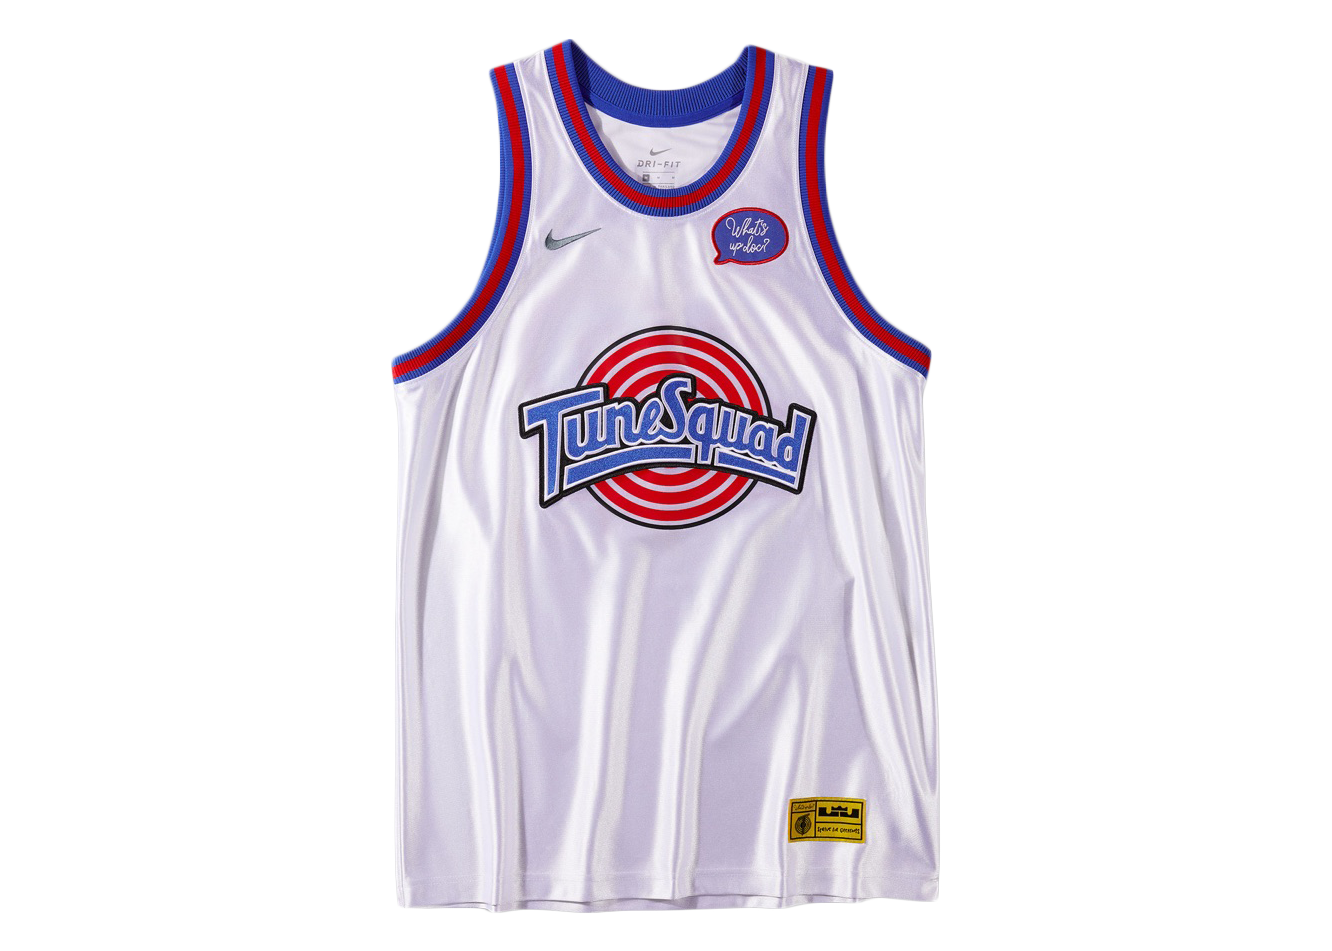 new toon squad jersey